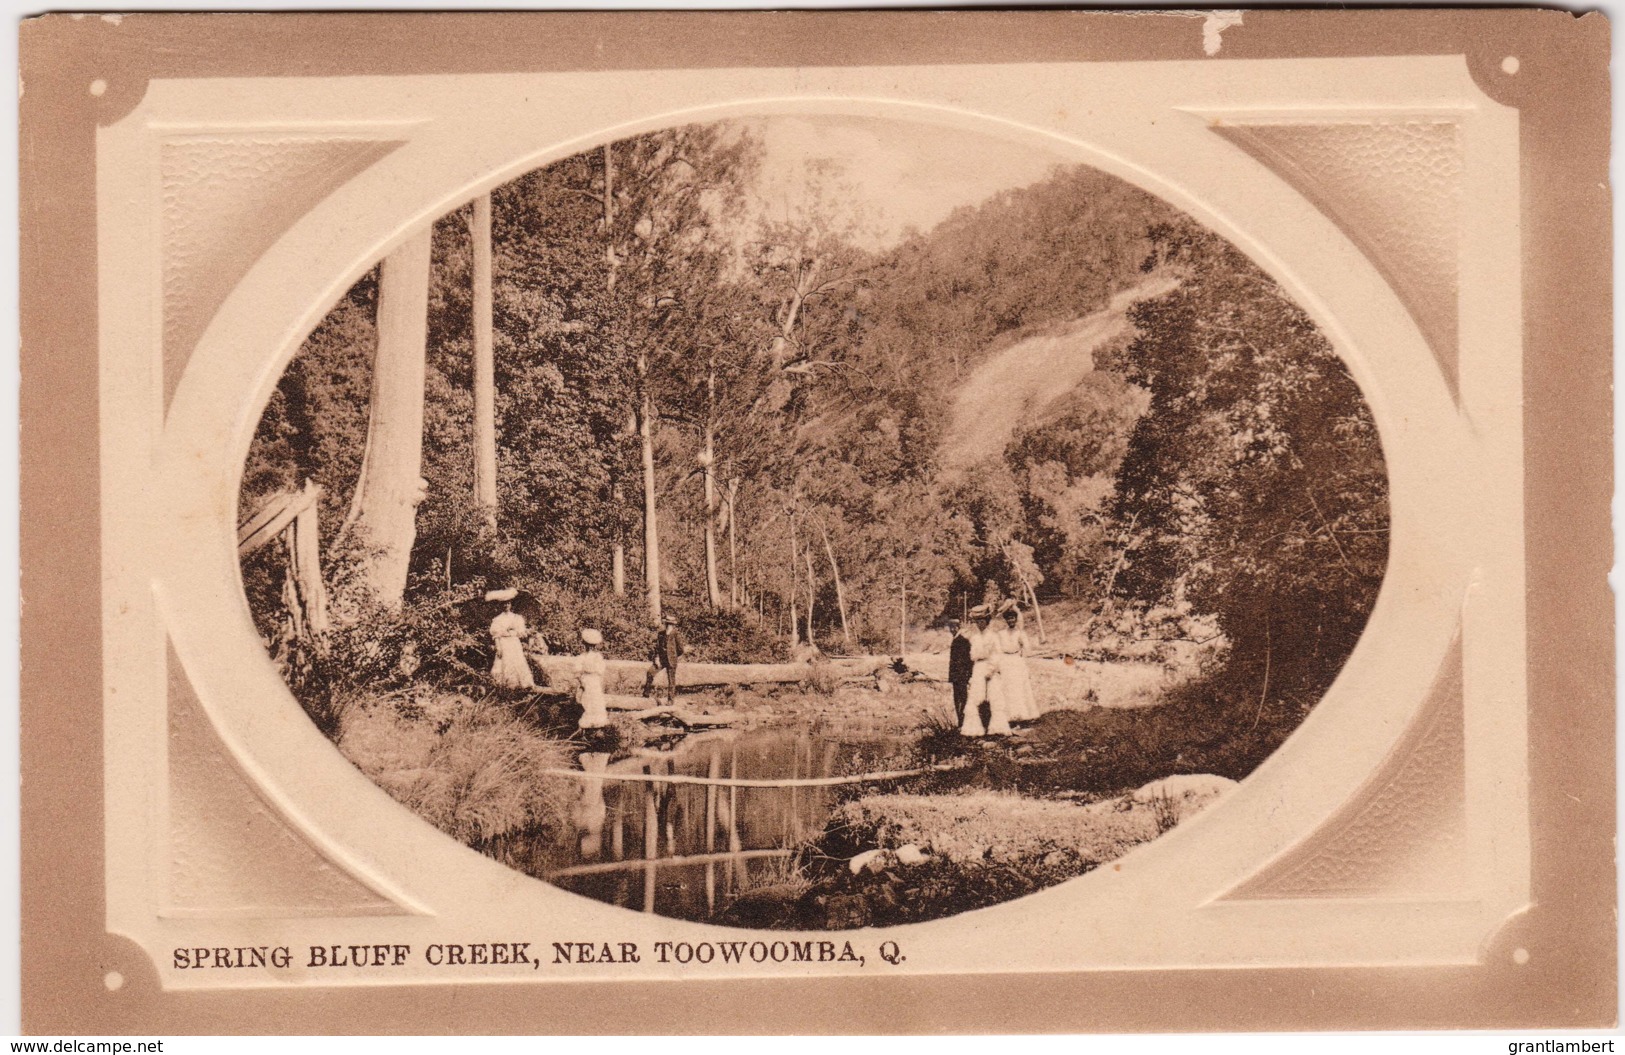 Spring Bluff Creek, Near Toowoomba, Queensland - Vintage With Message, 1911 - Towoomba / Darling Downs